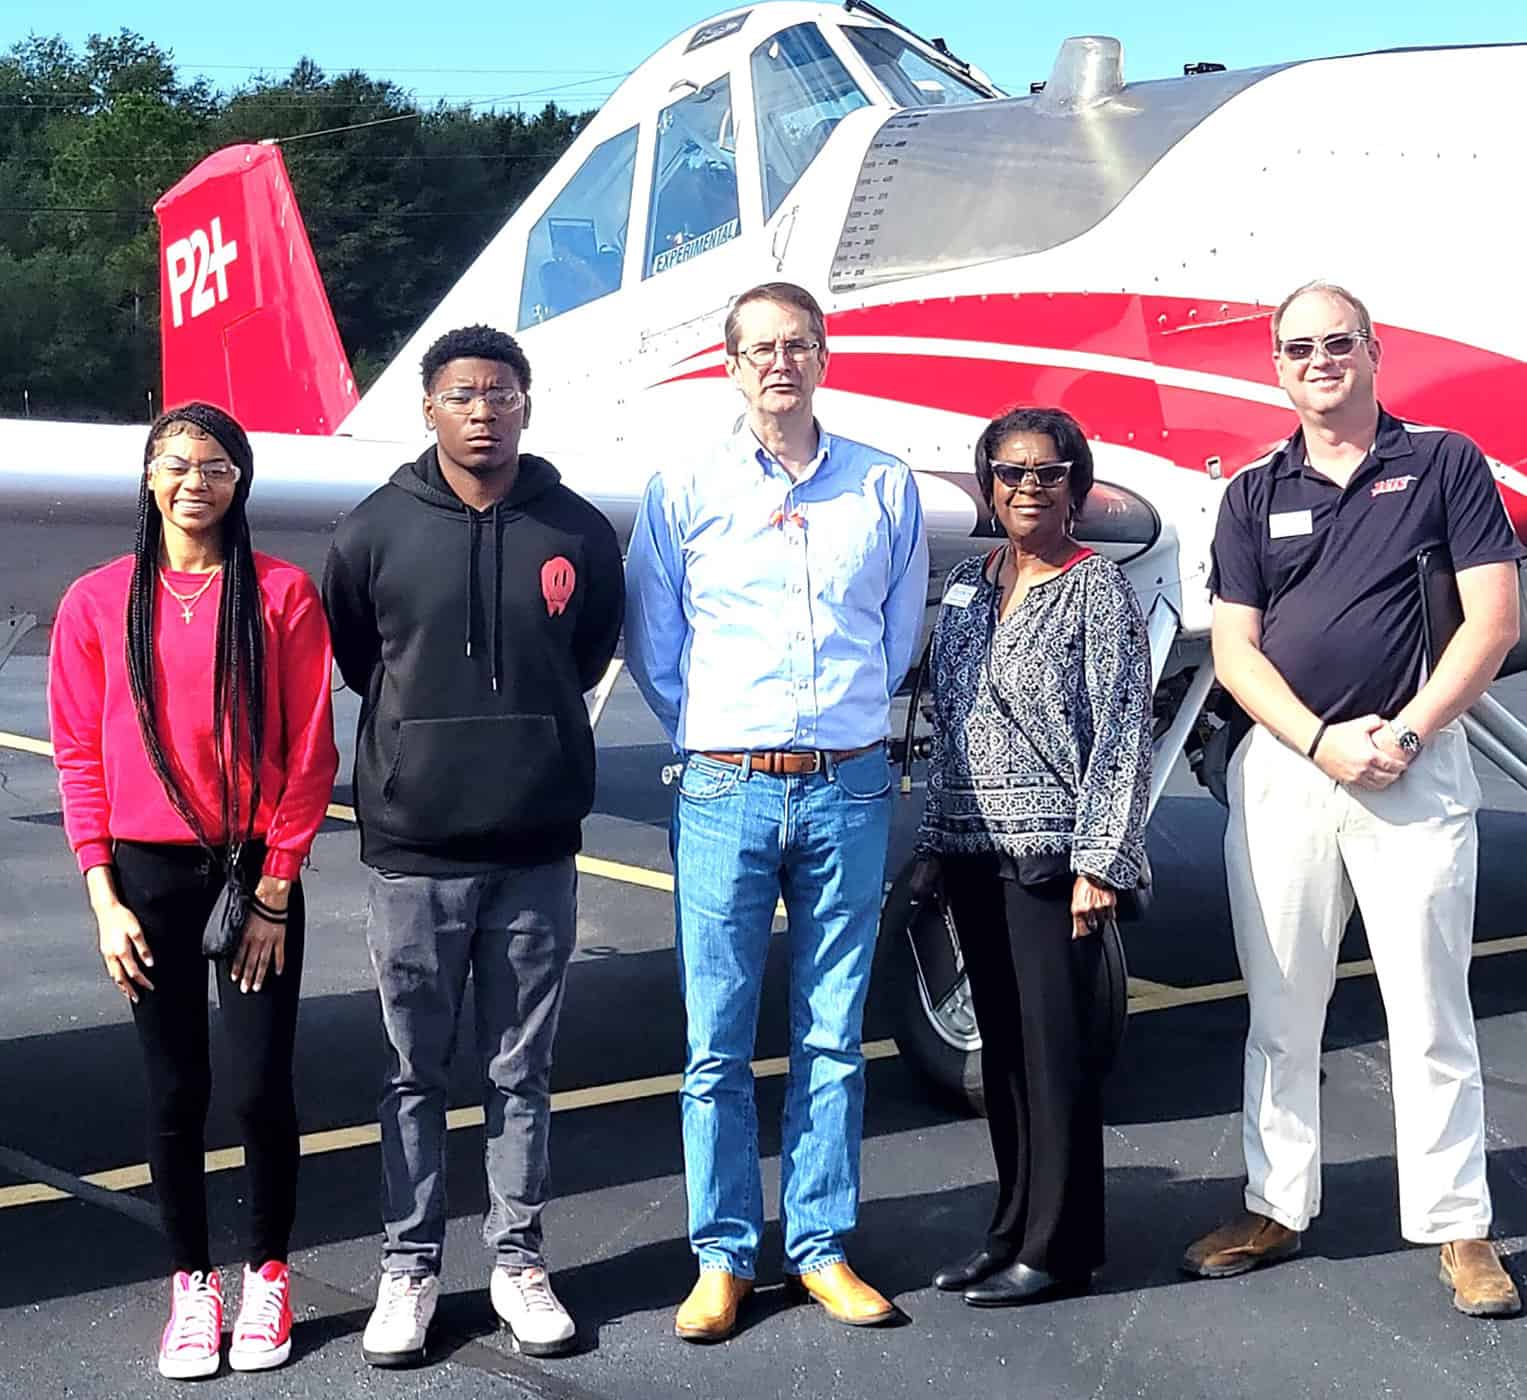 SGTC Aircraft Structural Technology students Shabrya Jefferson and Cameron Hillsman are shown above with Thrush CEO Mark McDonald and SGTC Career Services Director Cynthia Carter and SGTC Aircraft Structural Technology Instructor Jason Wisham after a tour of the Thrush Manufacturing facilities.